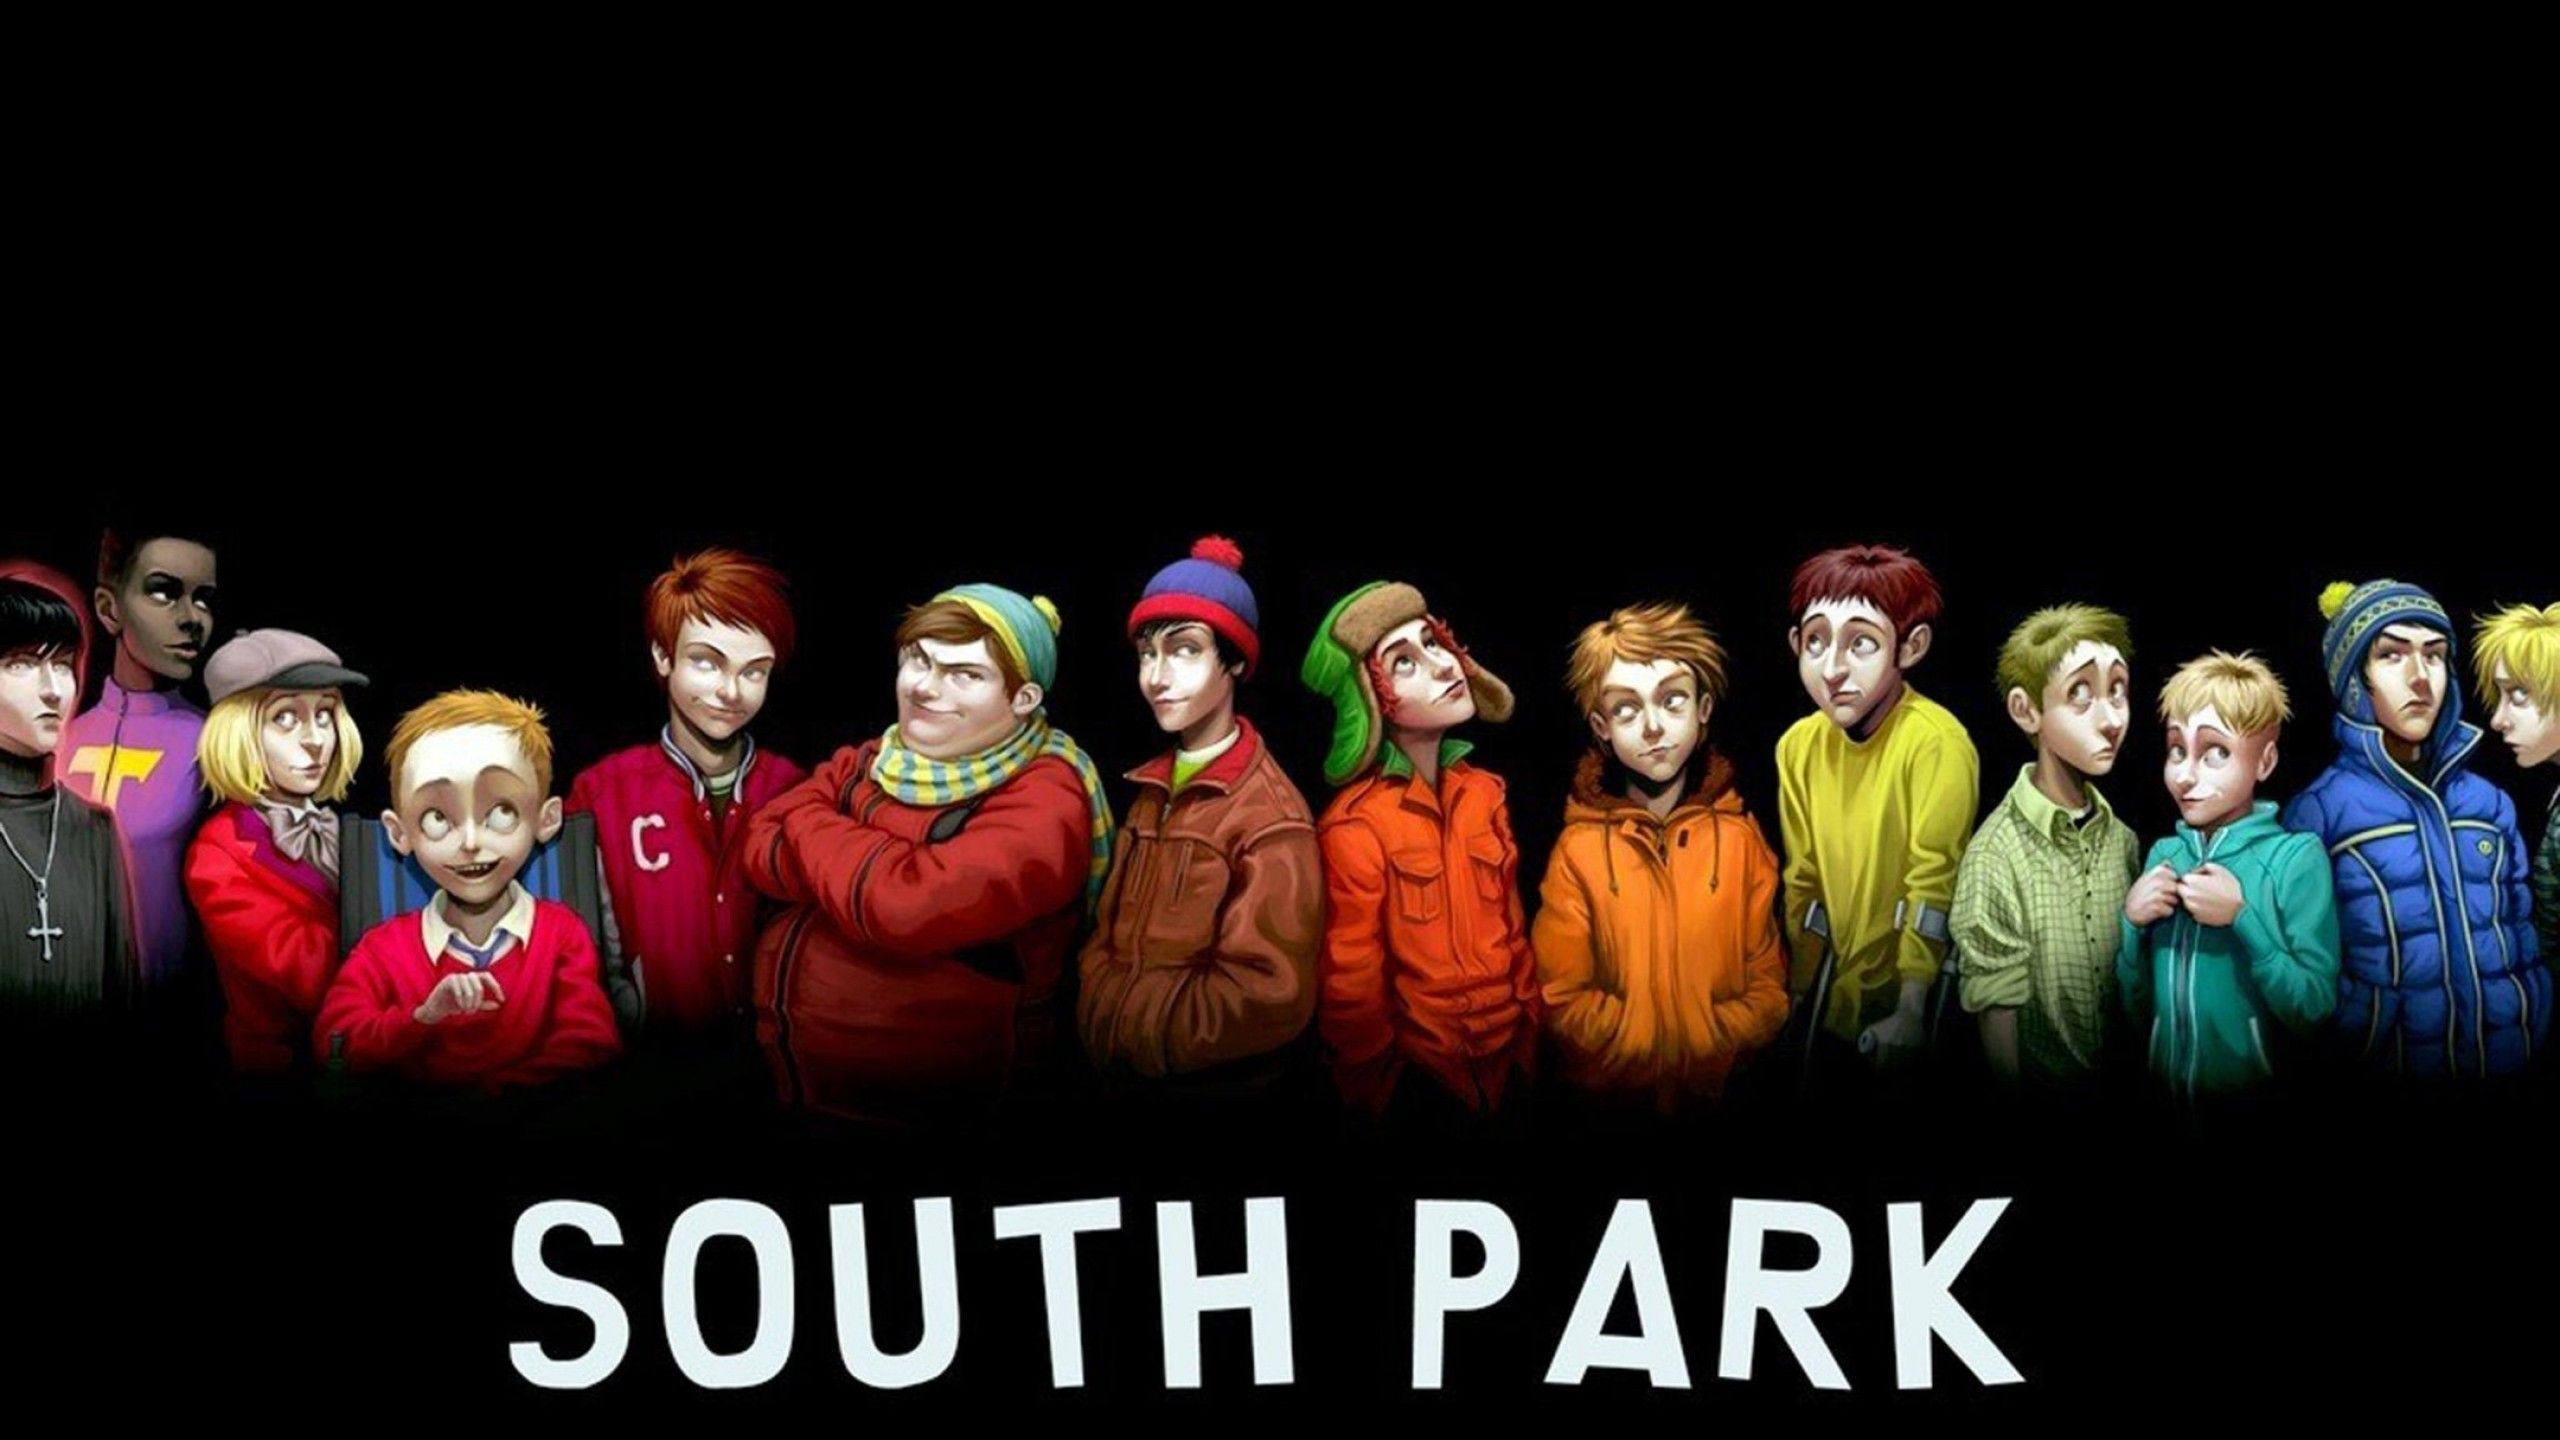 Tumblr south park, funny, characters, 2560x1440 HD Wallpaper and other